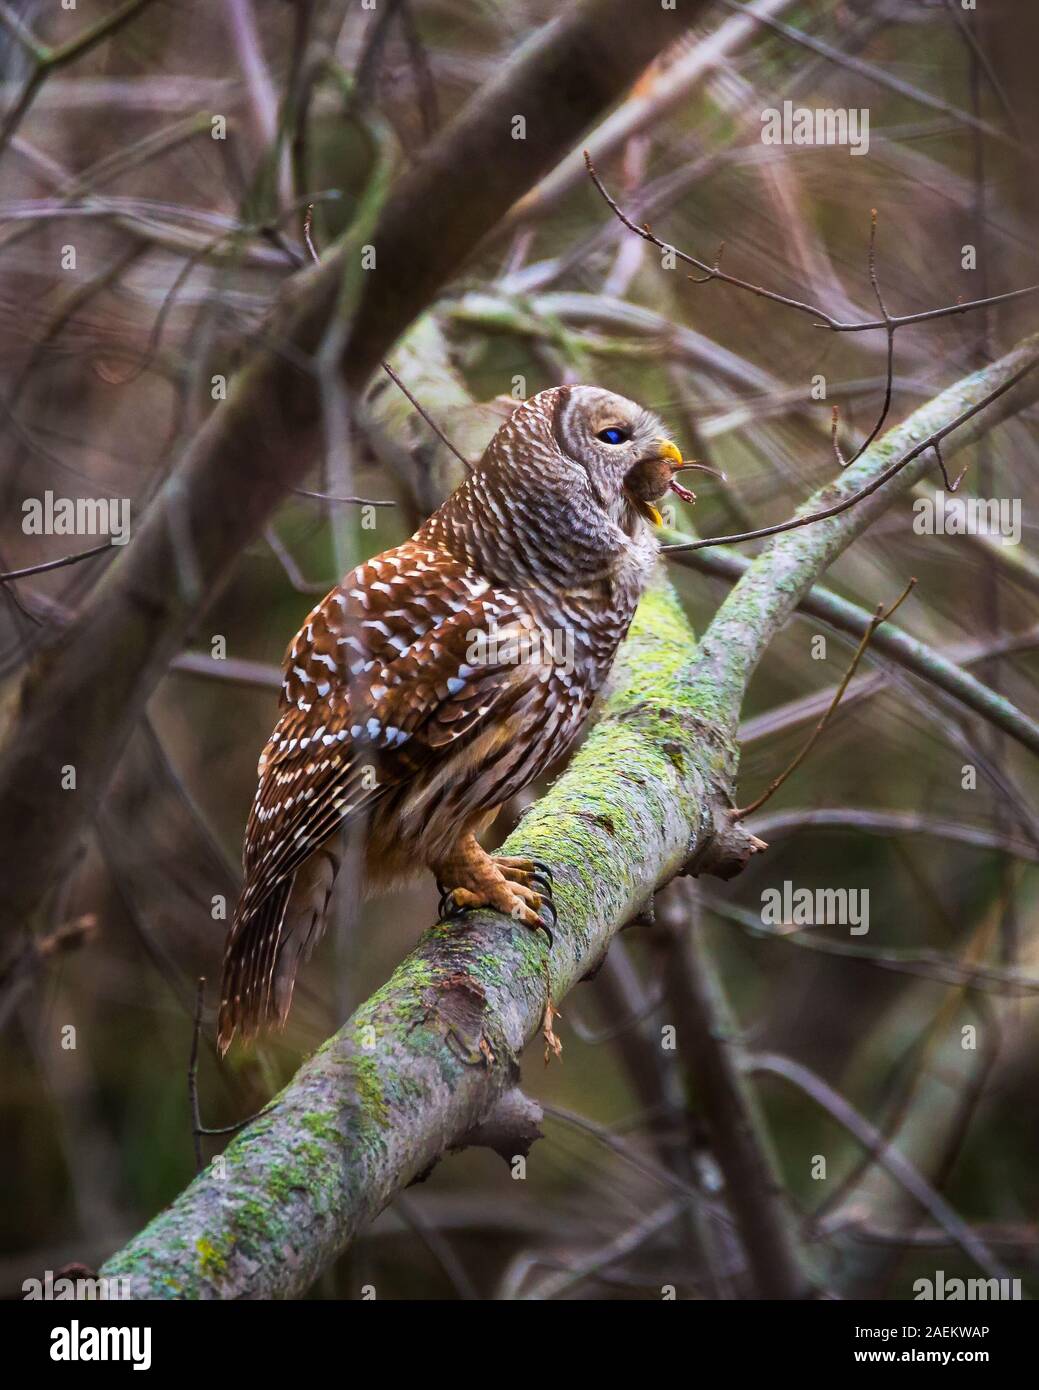 A Barred Owl gulps down its prey while perched on a branch in Ontario, Canada. Barred Owls are wood owls living mostly in coniferous/deciduous forest Stock Photo